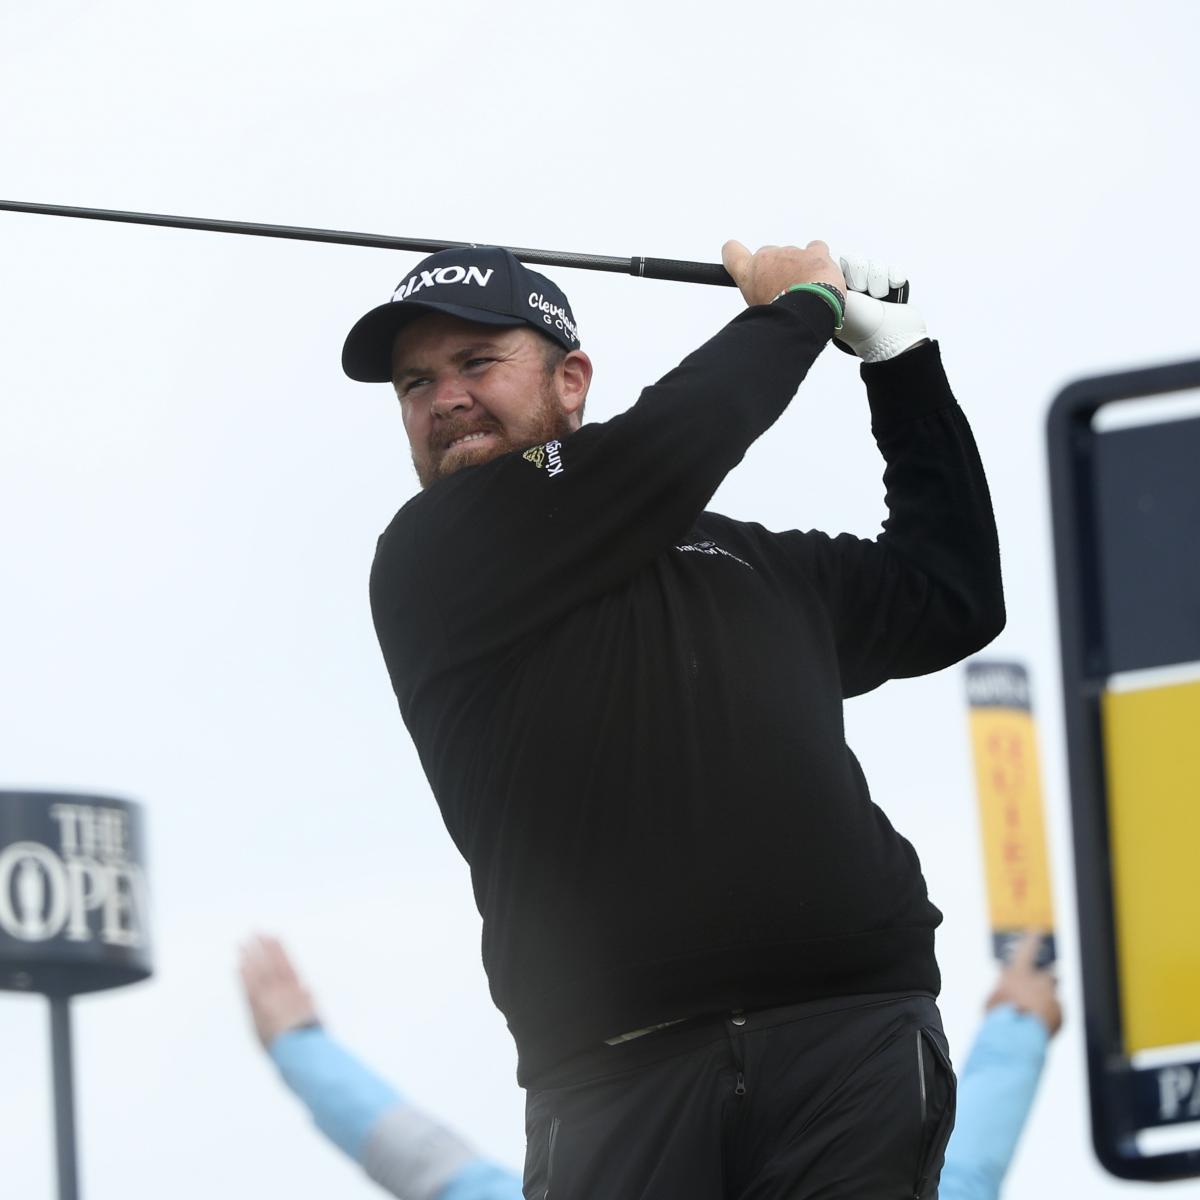 British Open 2019 Leaderboard Updating Results and Standings for